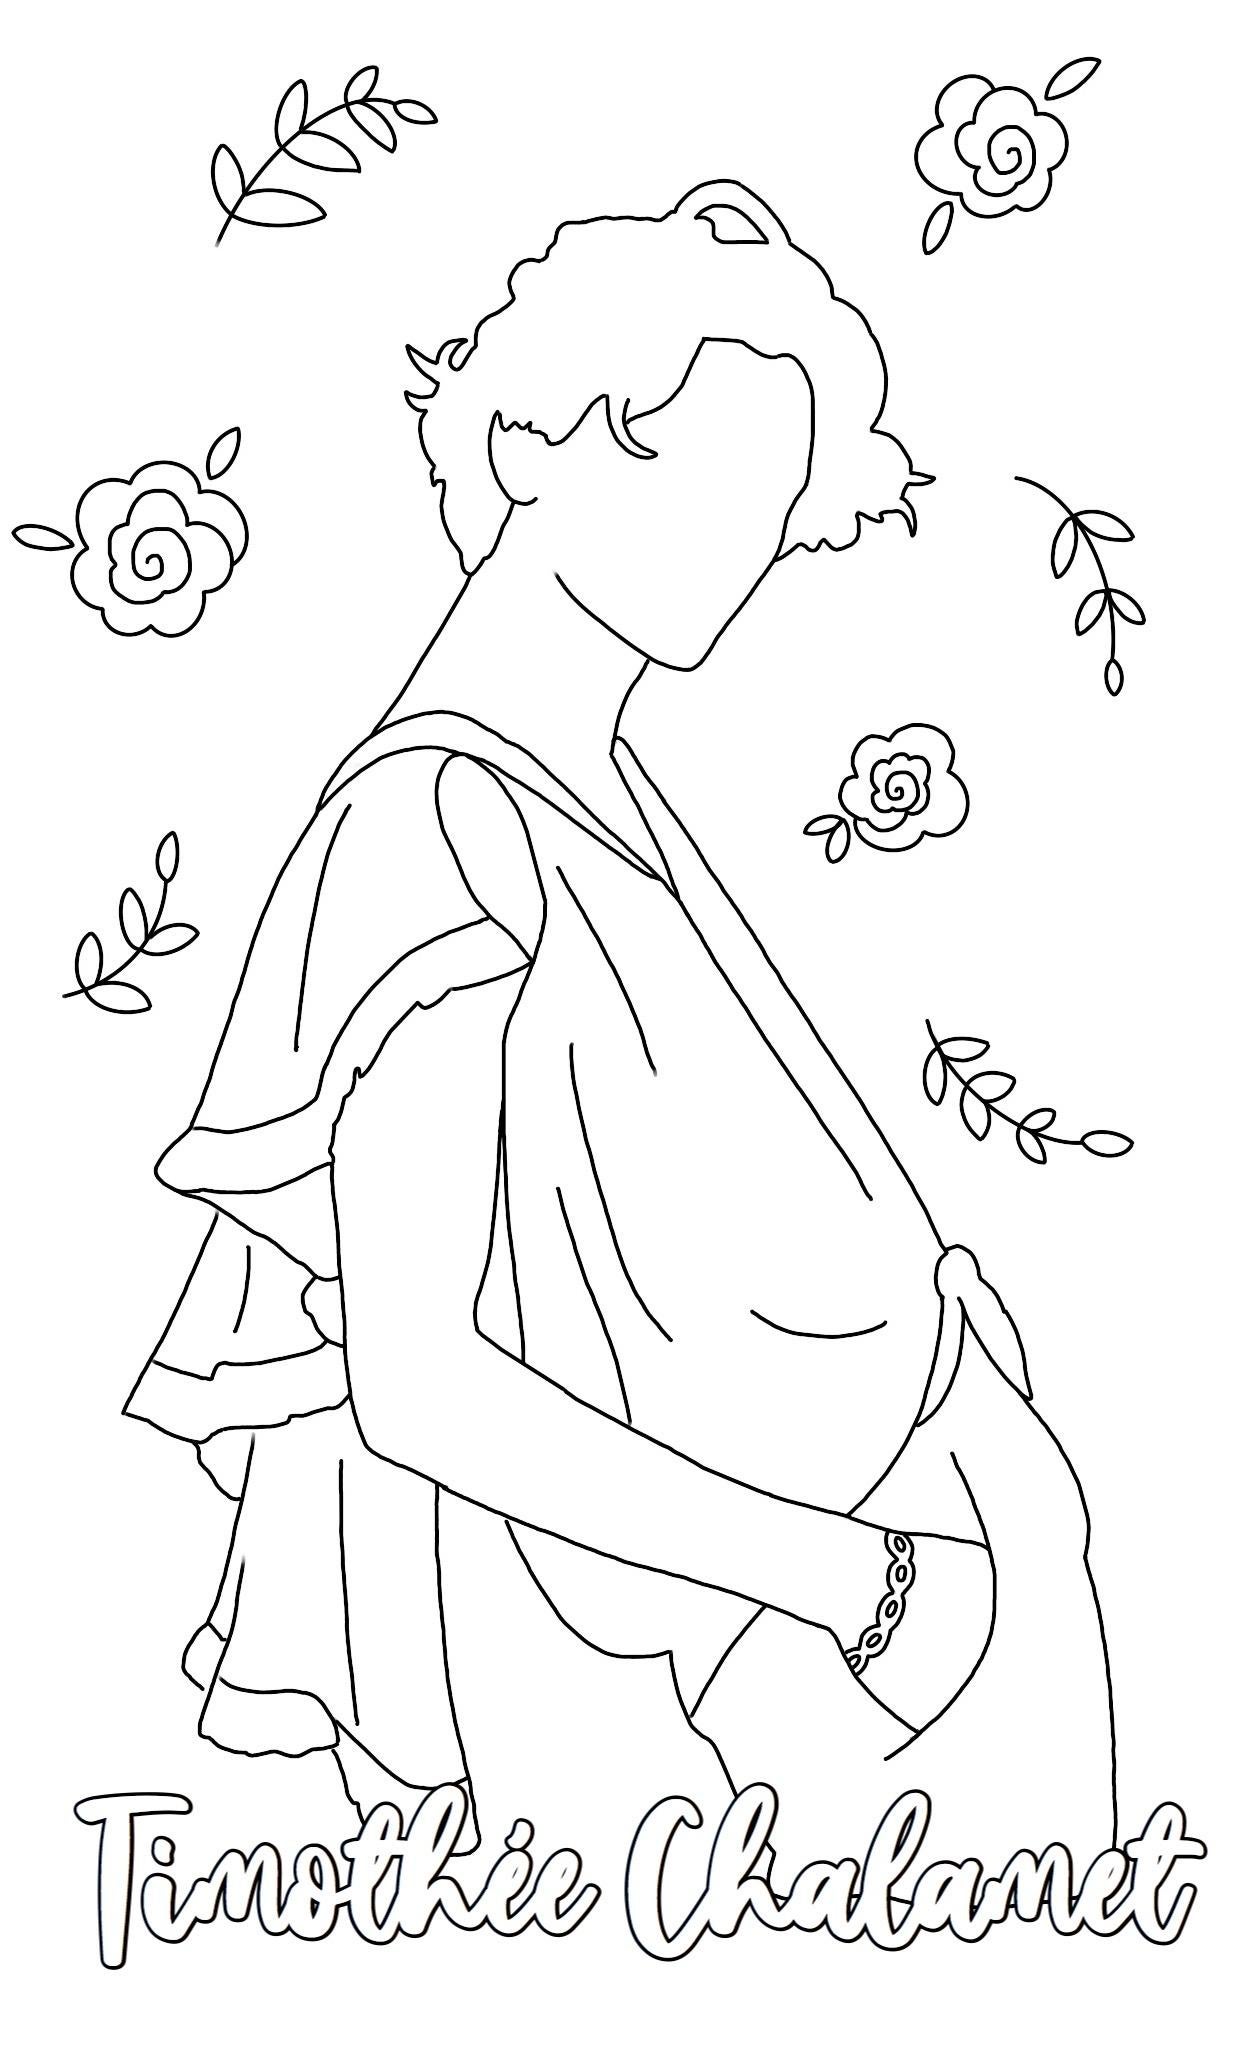 Timothee Coloring Pages : timotheechalamet